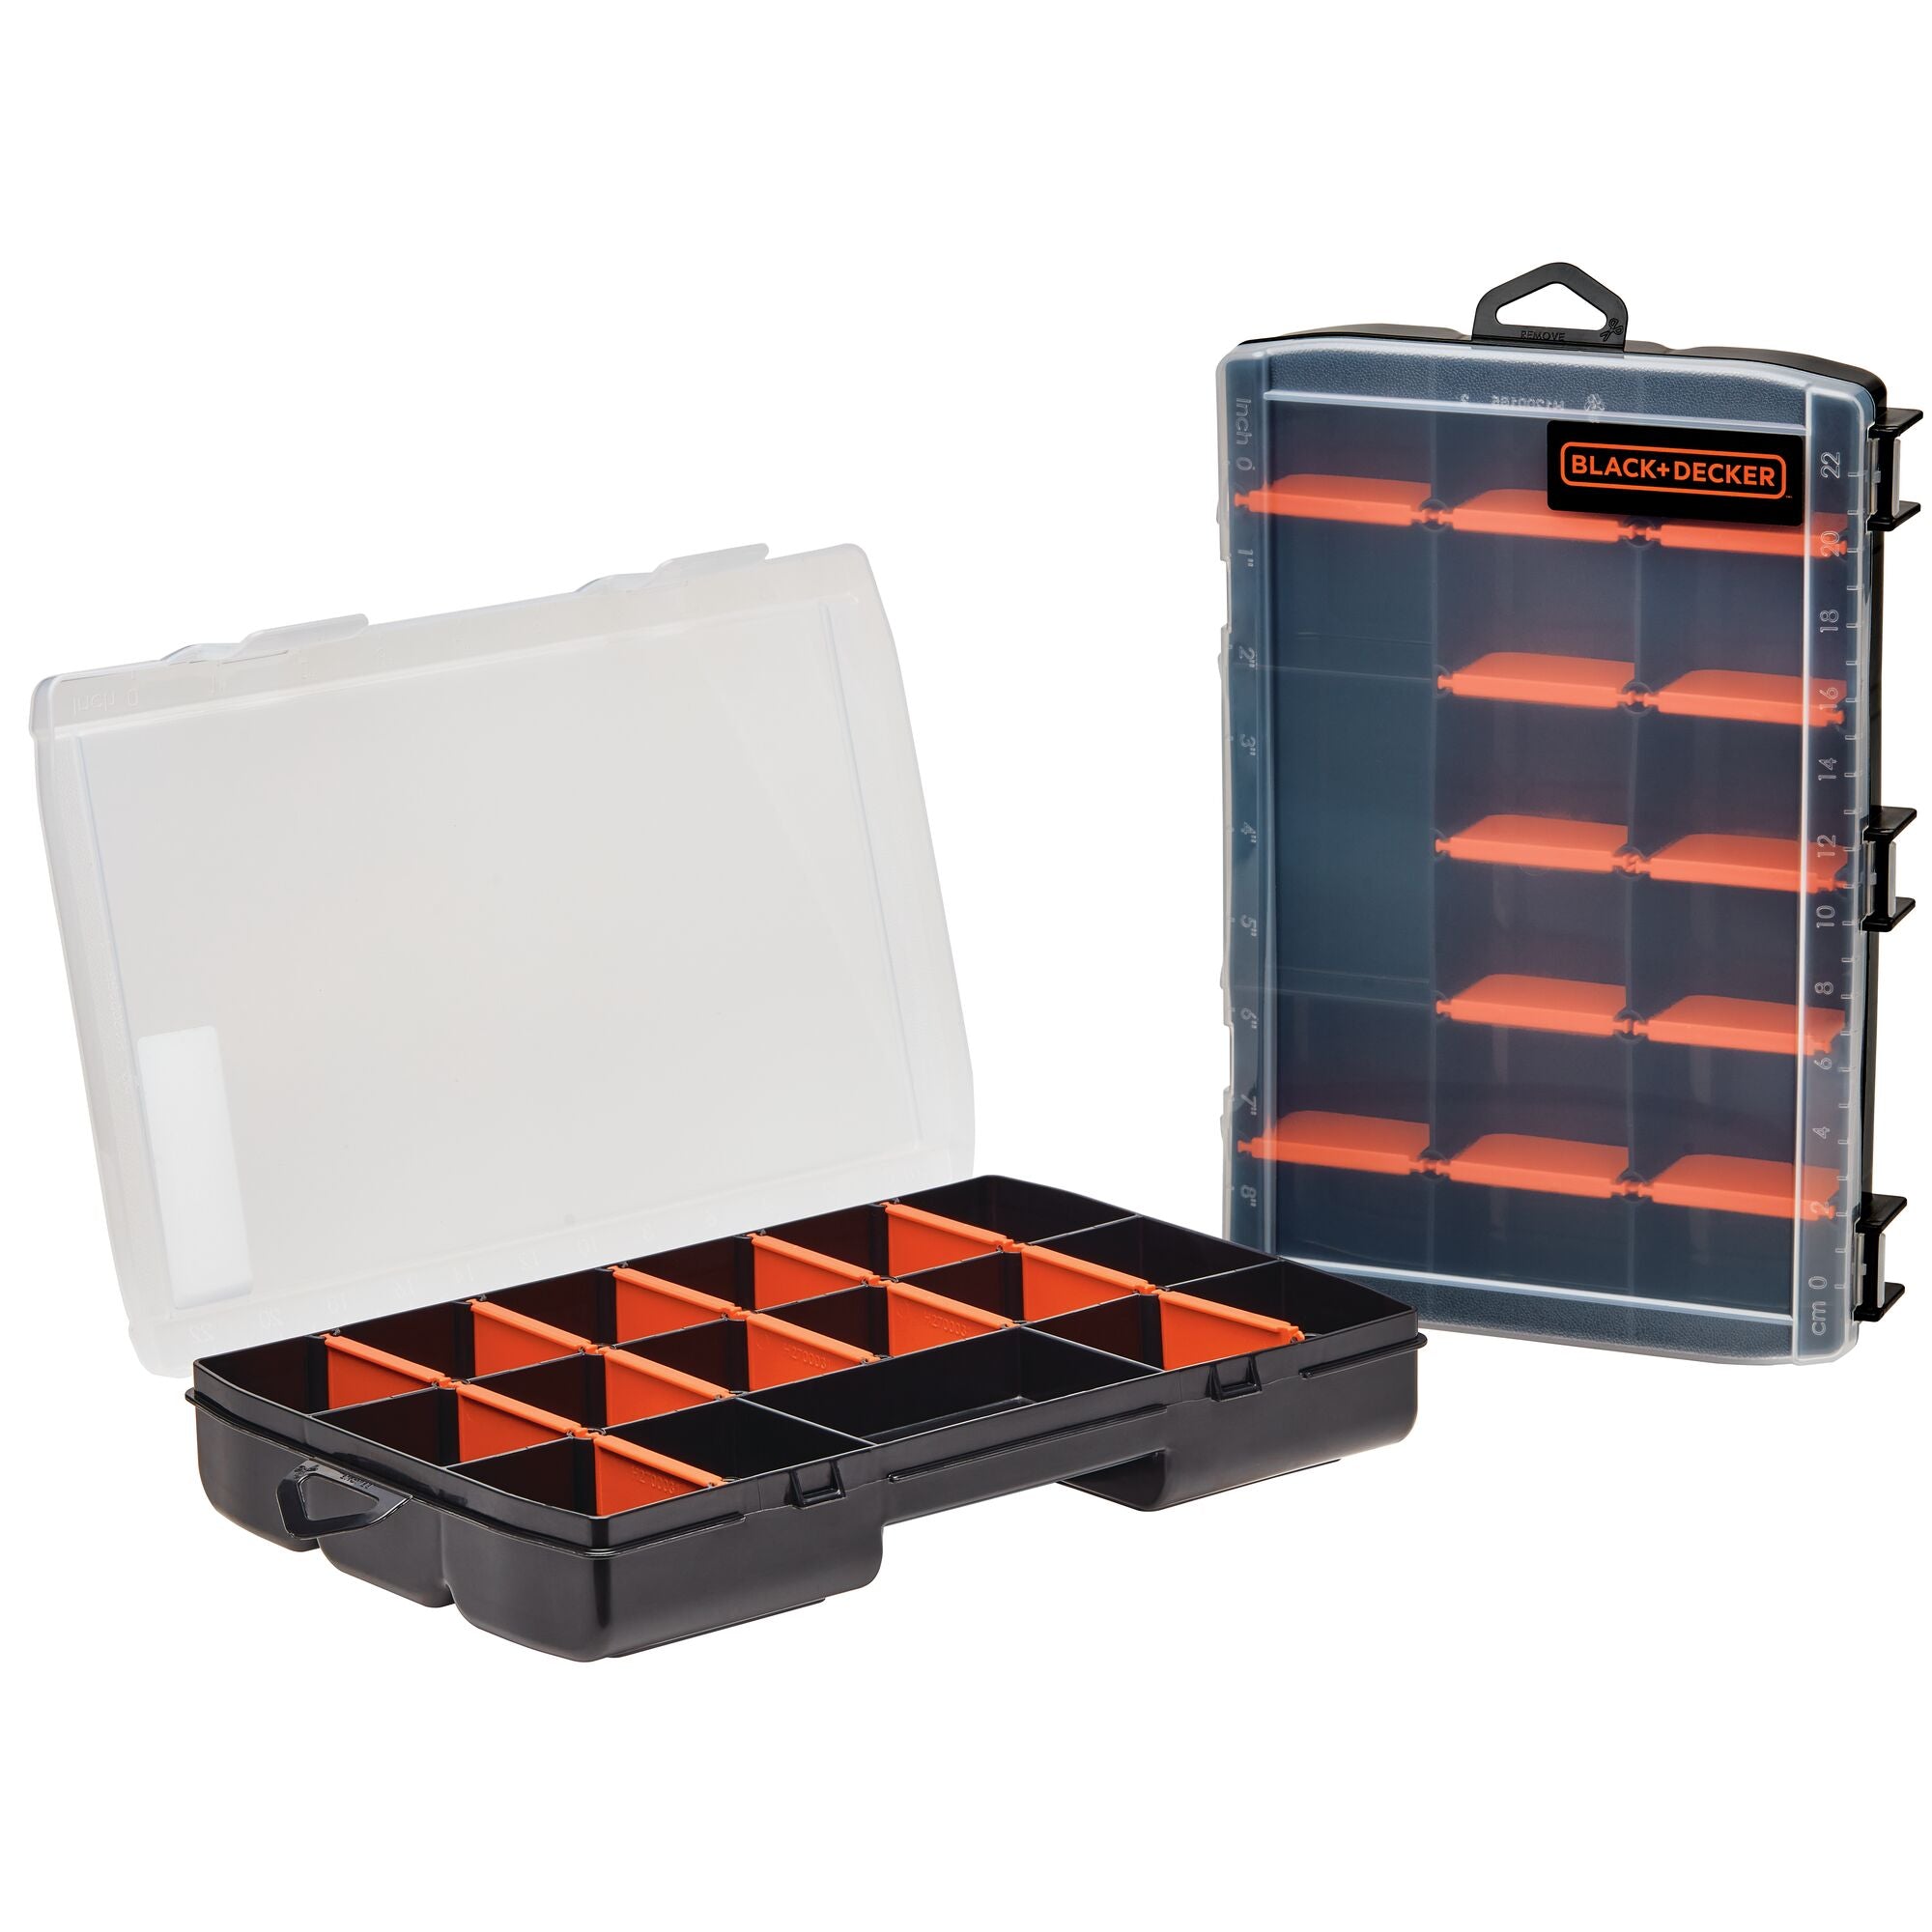 Small parts organizer box with dividers screw organizer and craft storage 17 compartment 2 pack.

